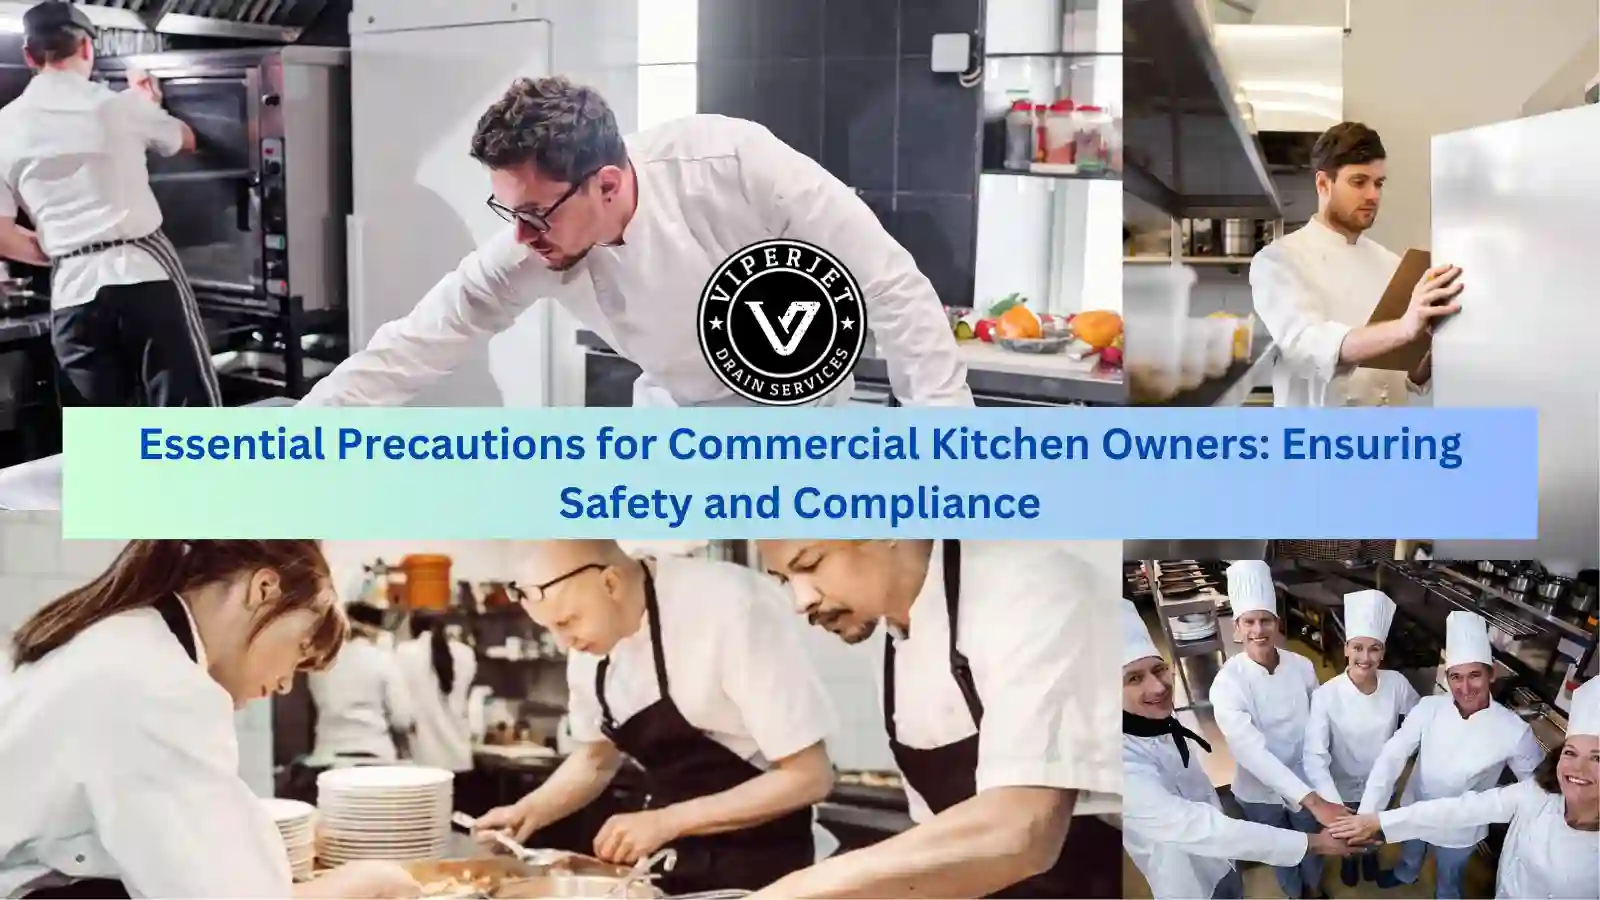 Essential Precautions for Commercial Kitchen Owners Ensuring Safety and Compliance